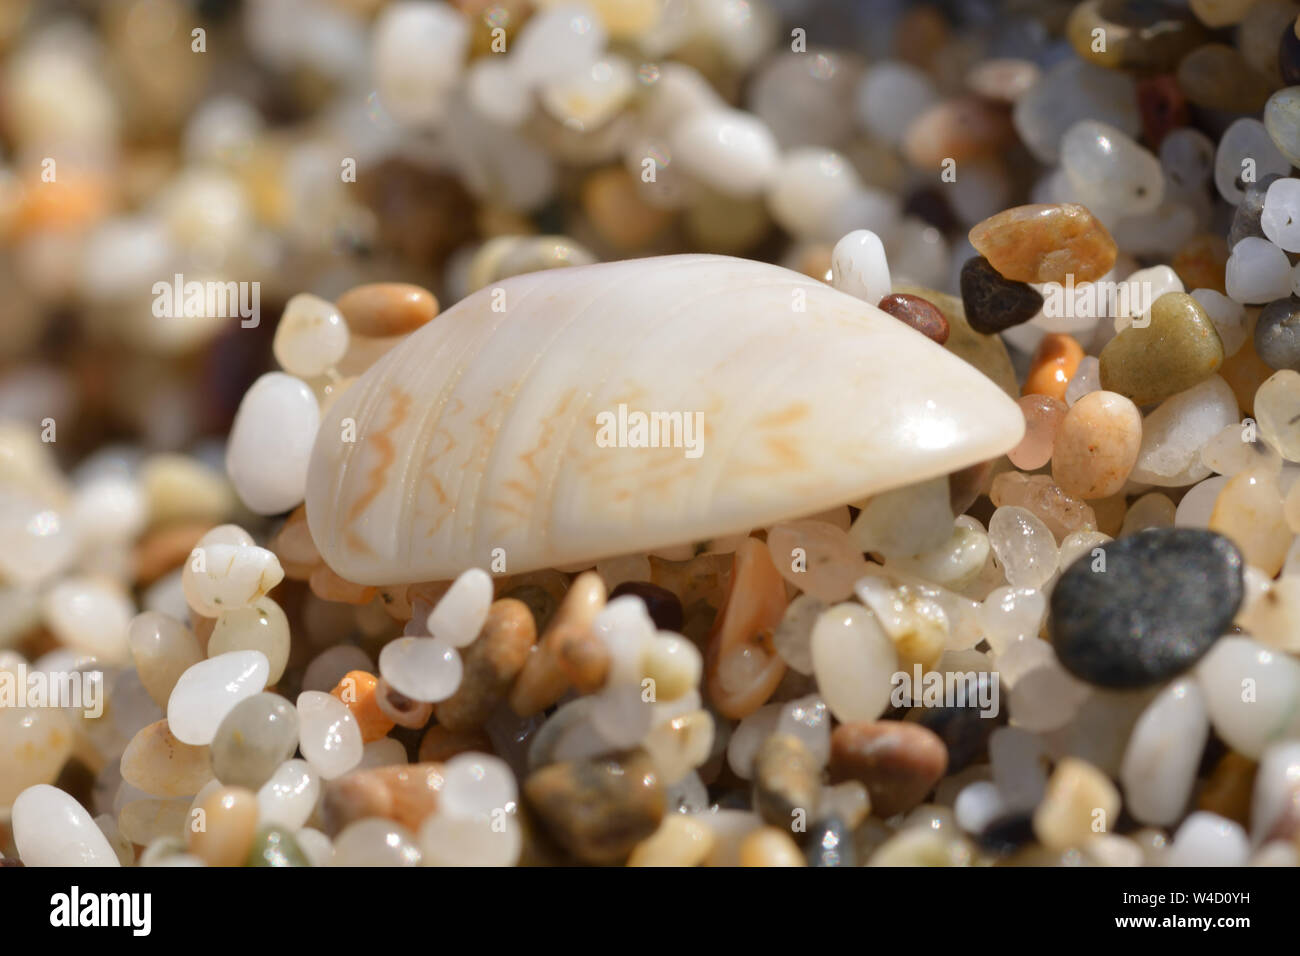 Sea shell in upon millimetric san grains. Shell of millimetric dimensions in a coastal deposit consisting of coarse sand Stock Photo